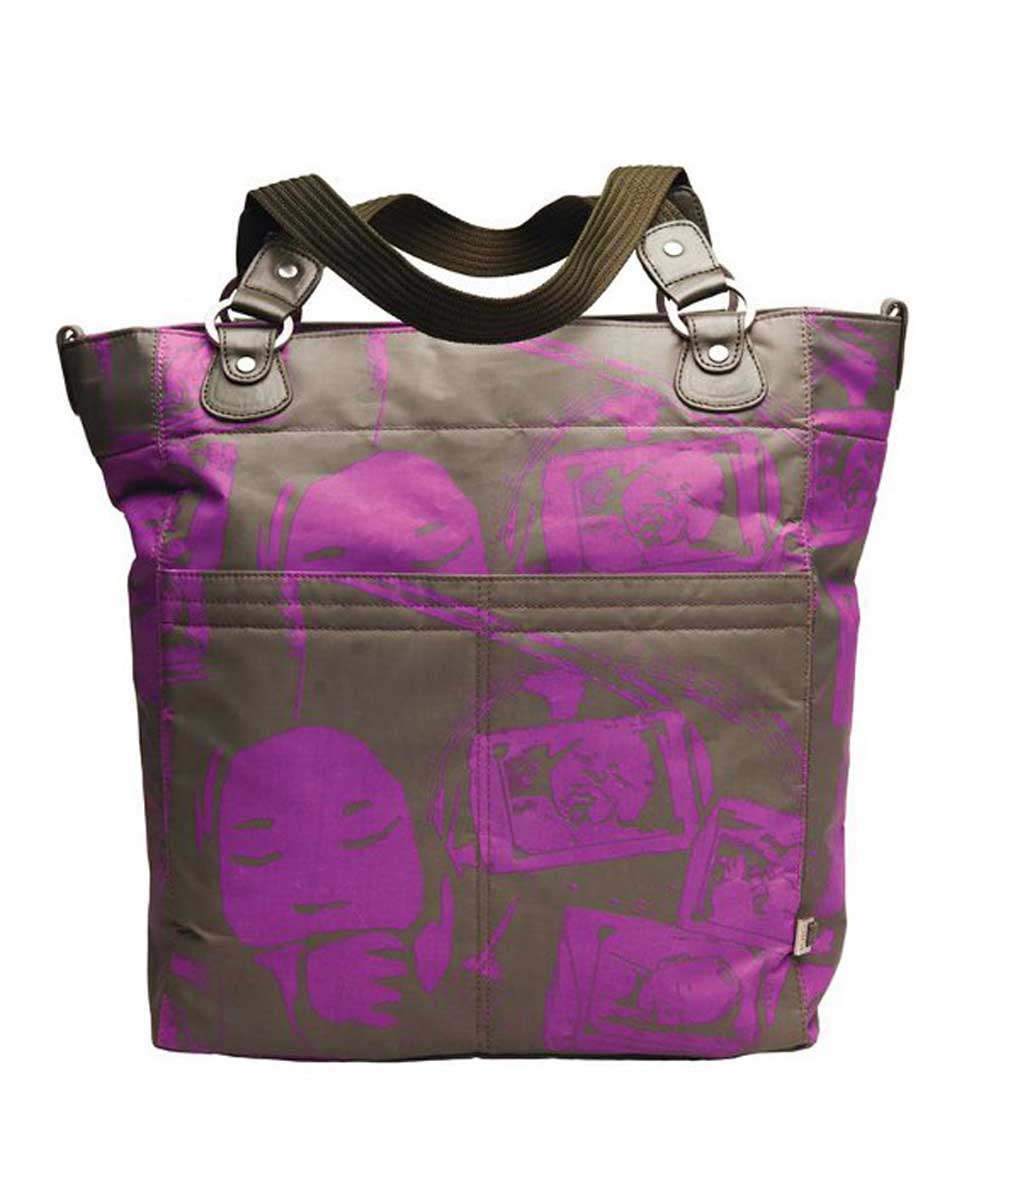 Foto Baby face oioi tote sack olive-violet